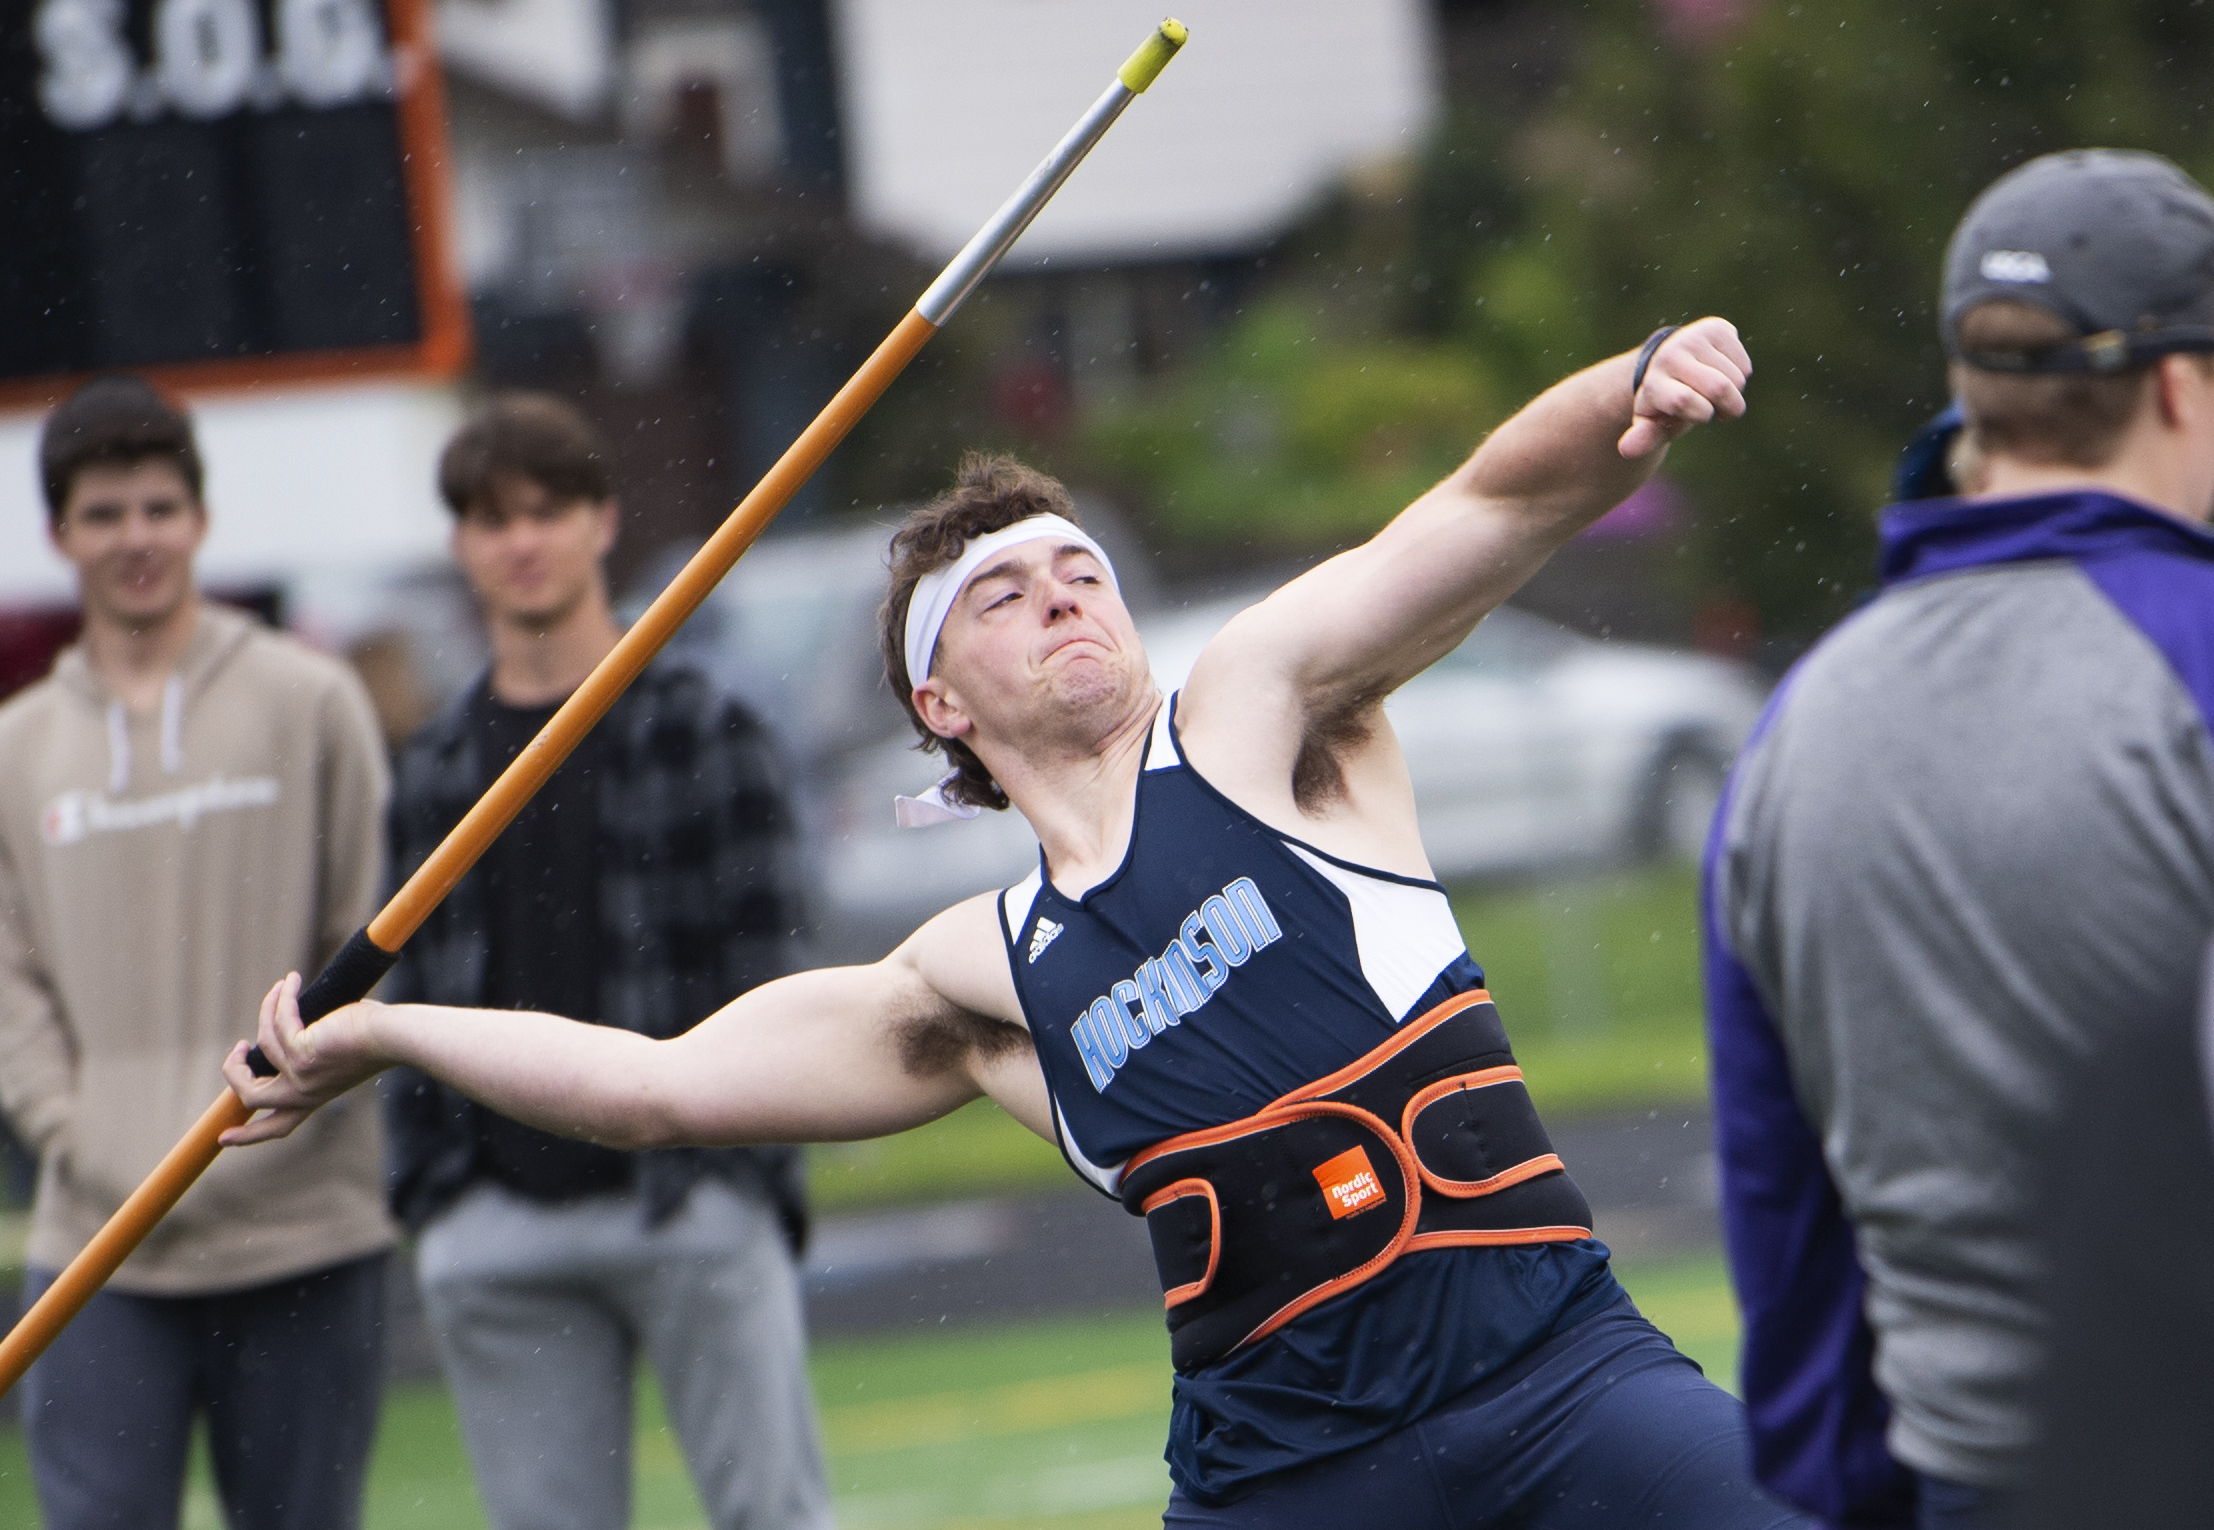 Hockinson's Cody Wheeler releases his winning throw of 196 feet, 5 inches to win the boys javelin at the 2A sub-district track and field meet at Washougal High School on Friday, May 13, 2022.